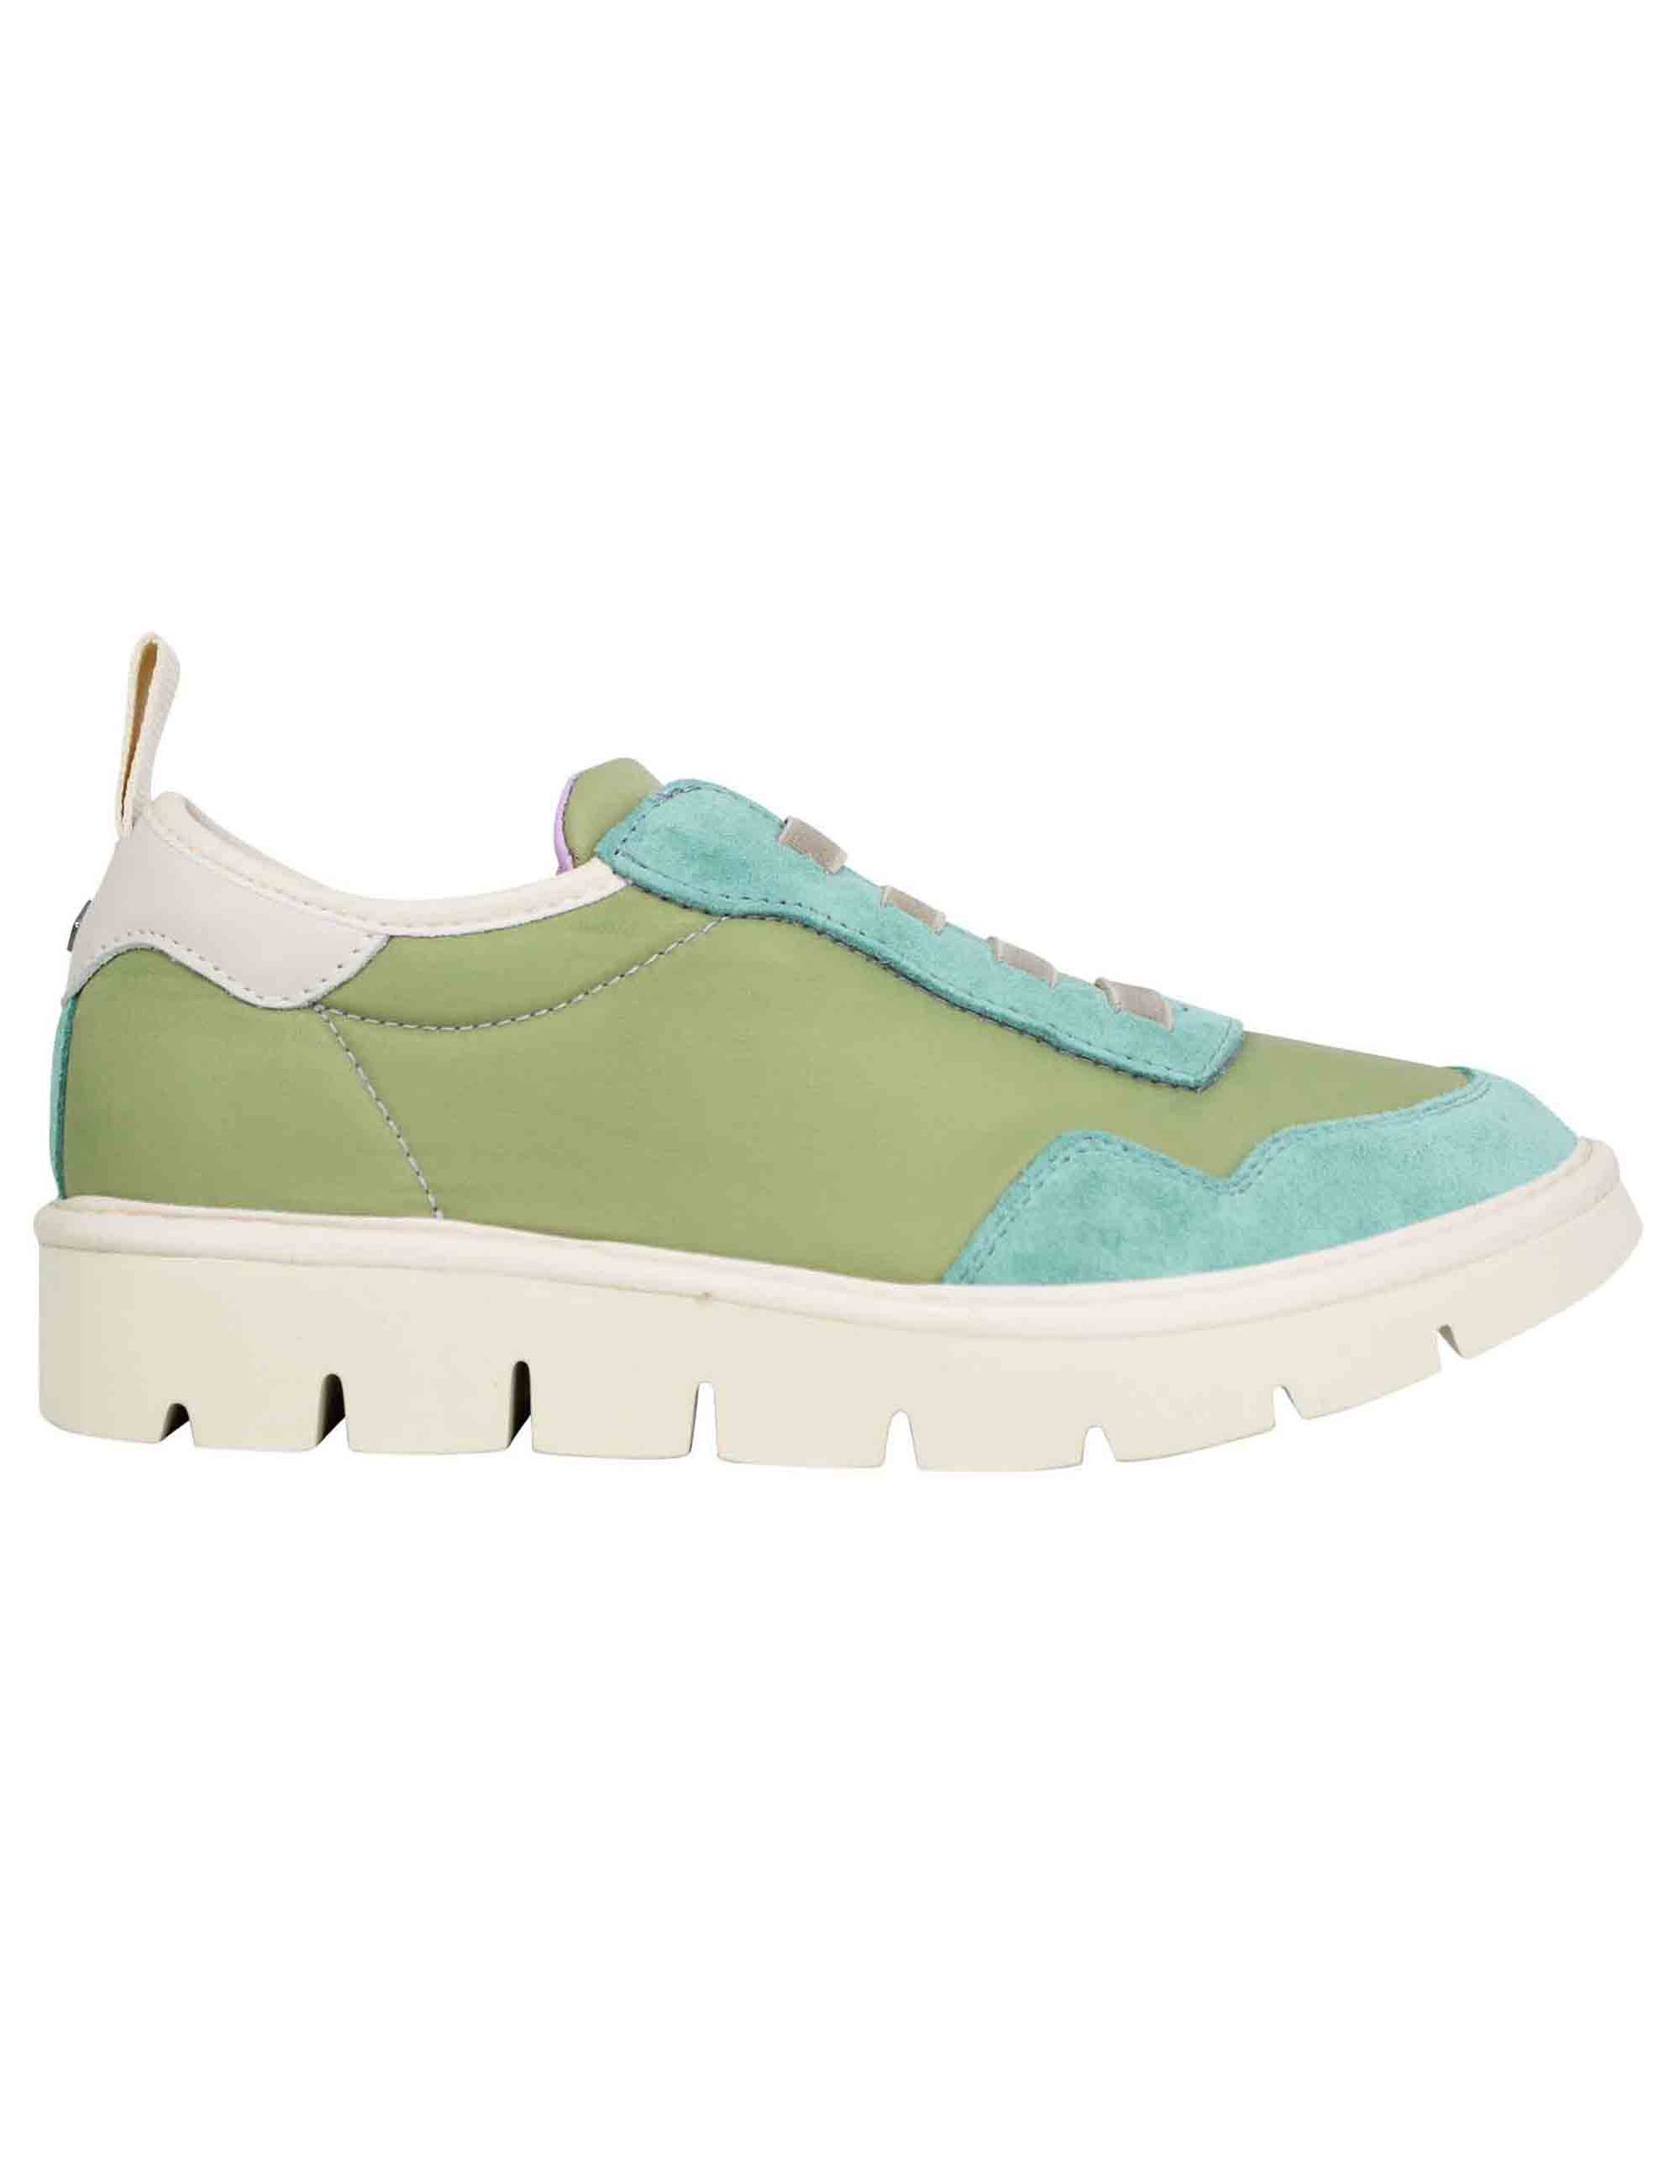 Sneakers donna in tessuto verde.